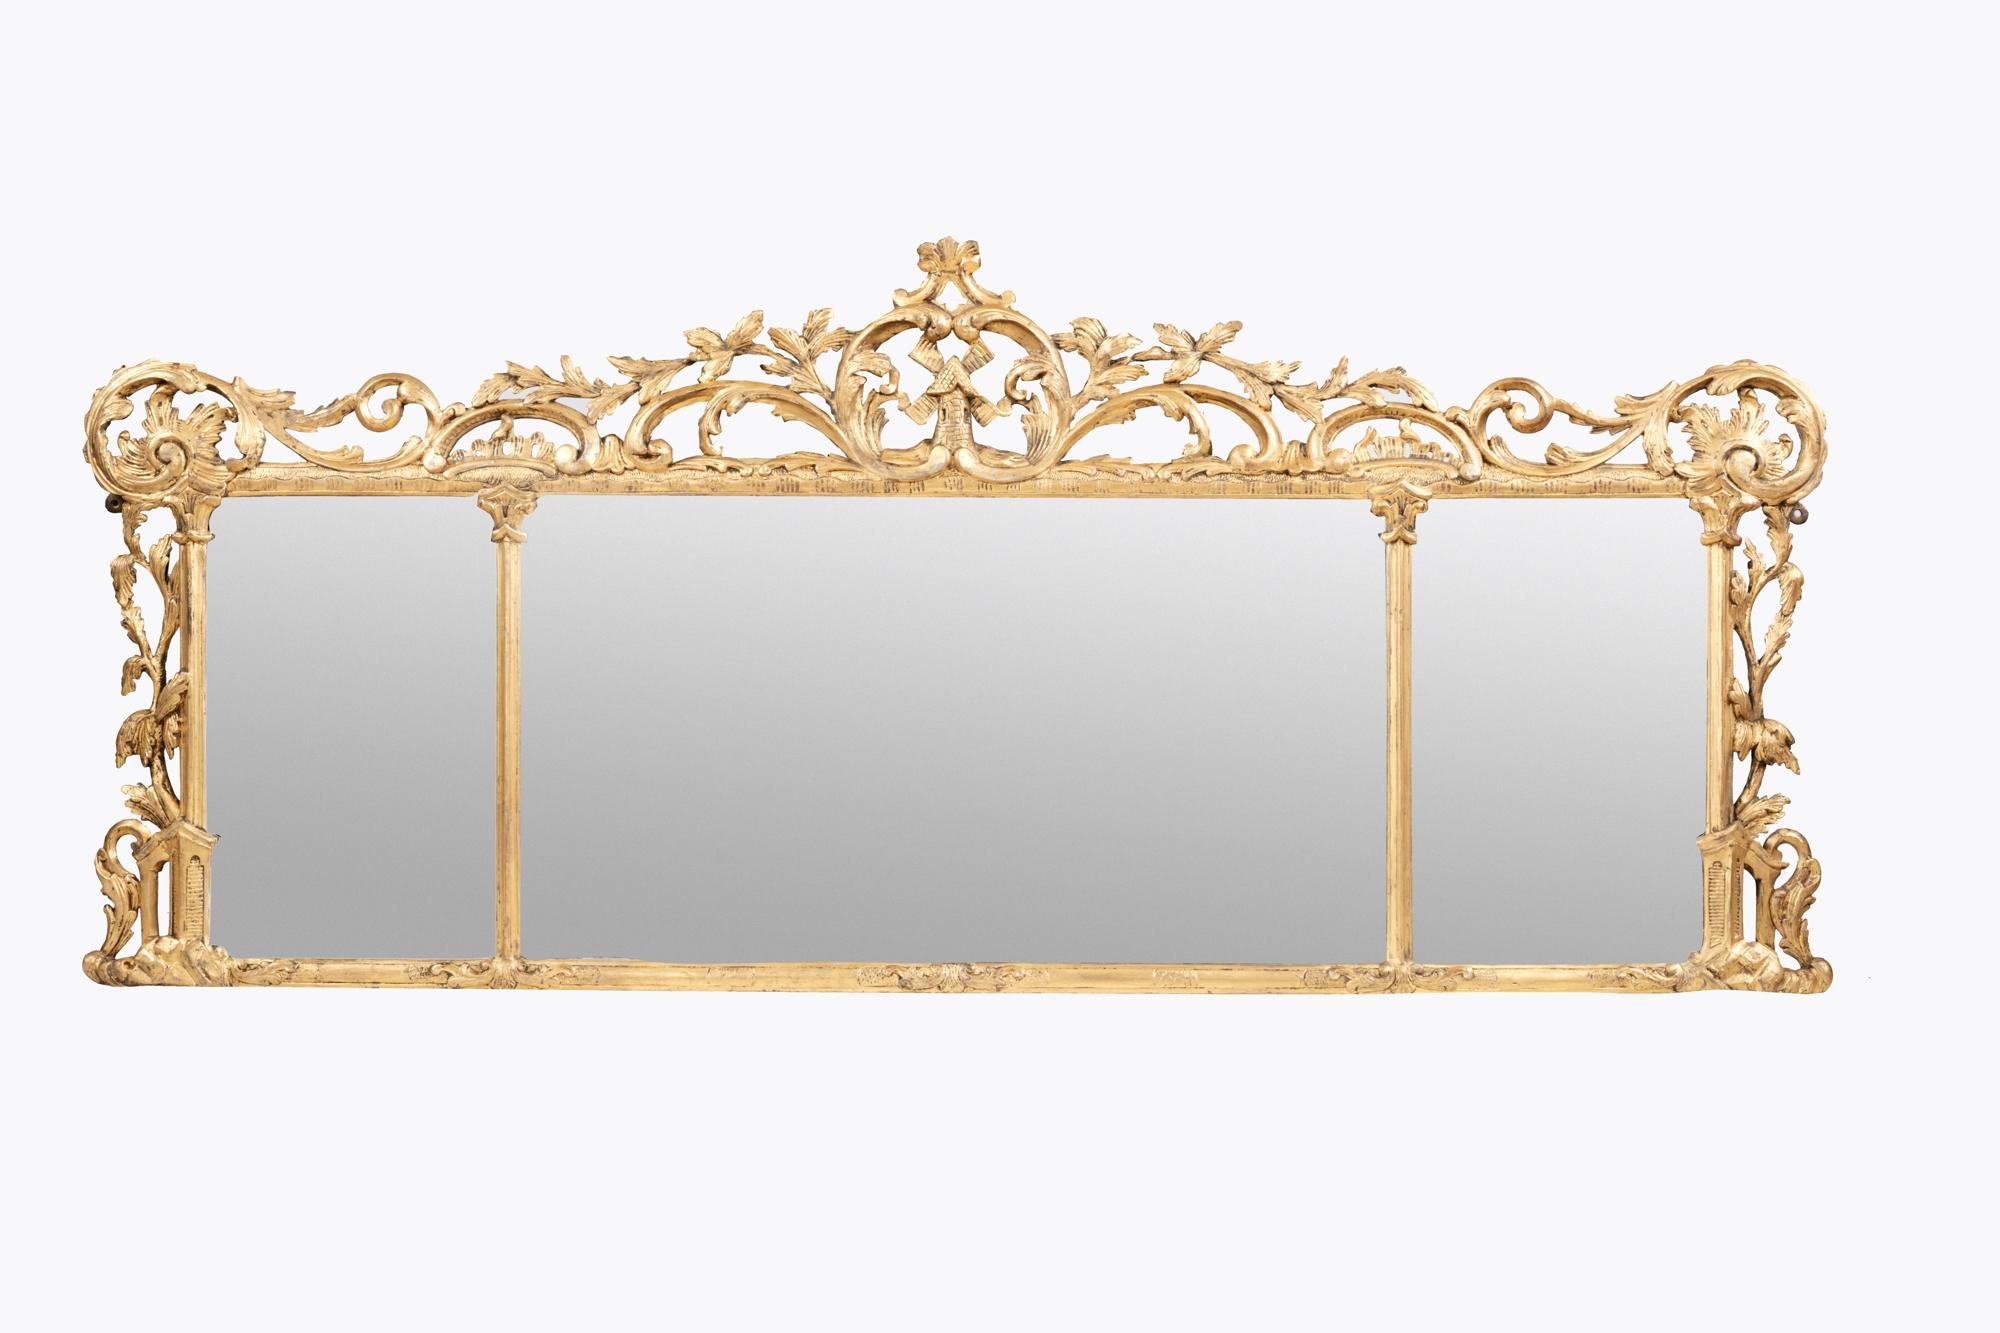 Giltwood compartmental overmantle mirror in the manner of Chippendale. The period glass plate divided by stylised columns sits within a highly carved giltwood frame. The centrepiece features a windmill surrounded with foliate detail, scrolls and